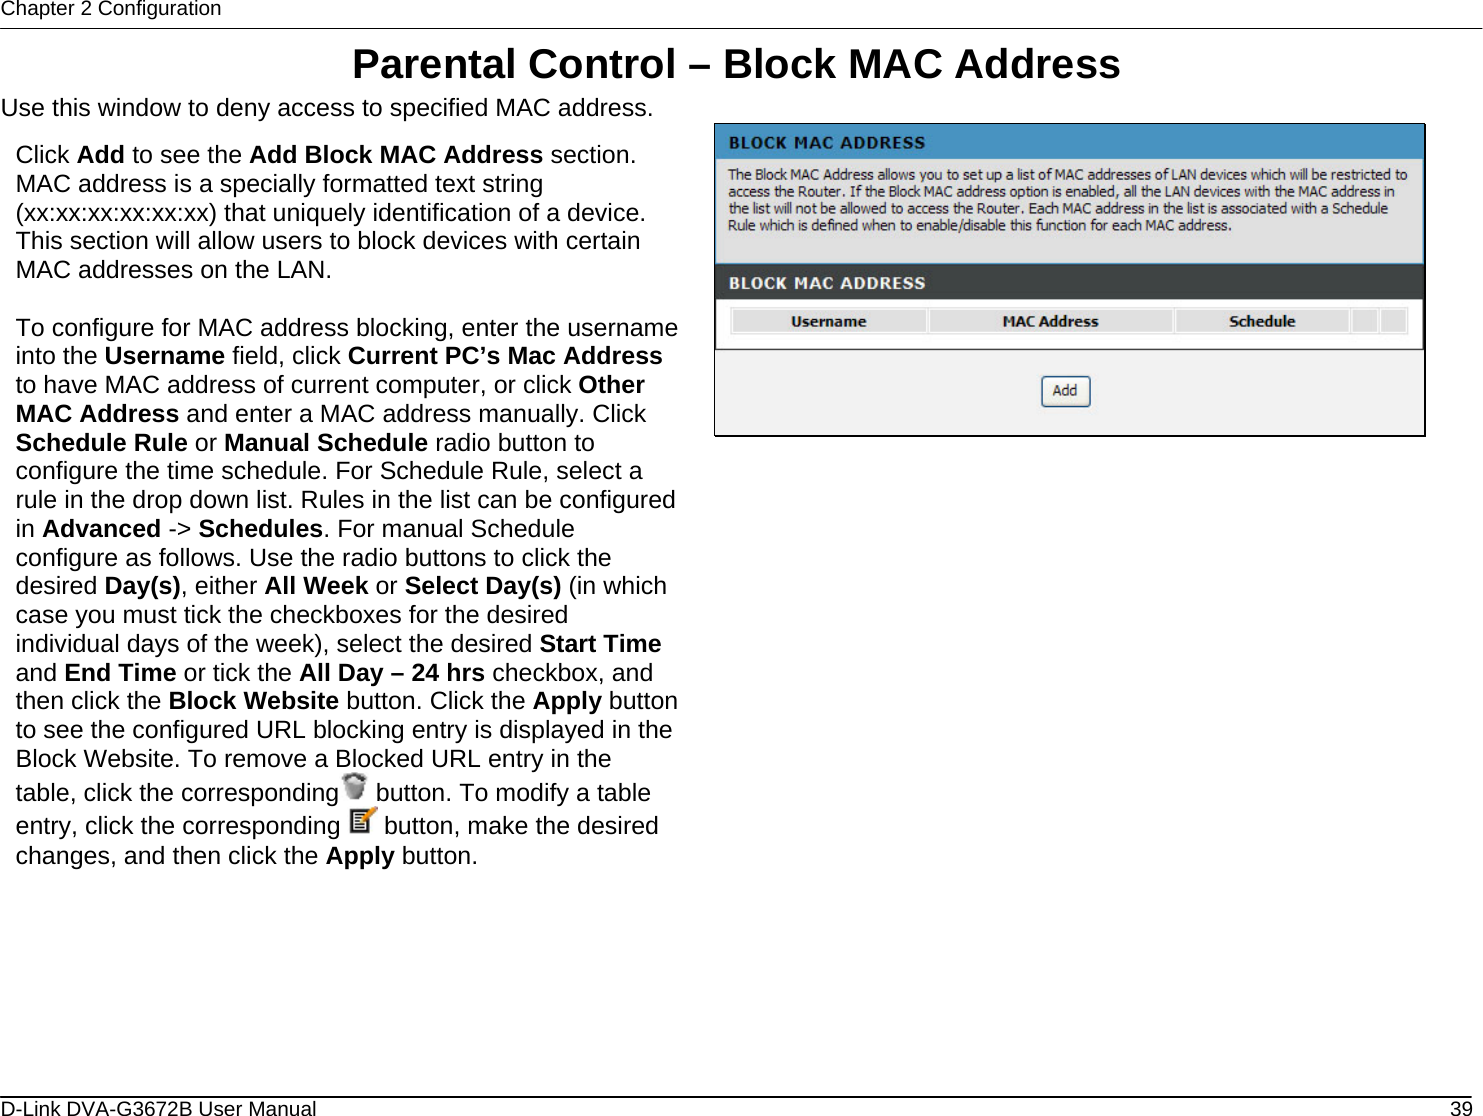 Chapter 2 Configuration Parental Control – Block MAC Address Use this window to deny access to specified MAC address.  Click Add to see the Add Block MAC Address section. MAC address is a specially formatted text string (xx:xx:xx:xx:xx:xx) that uniquely identification of a device. This section will allow users to block devices with certain MAC addresses on the LAN.  To configure for MAC address blocking, enter the username into the Username field, click Current PC’s Mac Address to have MAC address of current computer, or click Other MAC Address and enter a MAC address manually. Click Schedule Rule or Manual Schedule radio button to configure the time schedule. For Schedule Rule, select a rule in the drop down list. Rules in the list can be configured in Advanced -&gt; Schedules. For manual Schedule configure as follows. Use the radio buttons to click the desired Day(s), either All Week or Select Day(s) (in which case you must tick the checkboxes for the desired individual days of the week), select the desired Start Time and End Time or tick the All Day – 24 hrs checkbox, and then click the Block Website button. Click the Apply button to see the configured URL blocking entry is displayed in the Block Website. To remove a Blocked URL entry in the table, click the corresponding  button. To modify a table entry, click the corresponding   button, make the desired changes, and then click the Apply button.                       D-Link DVA-G3672B User Manual  39